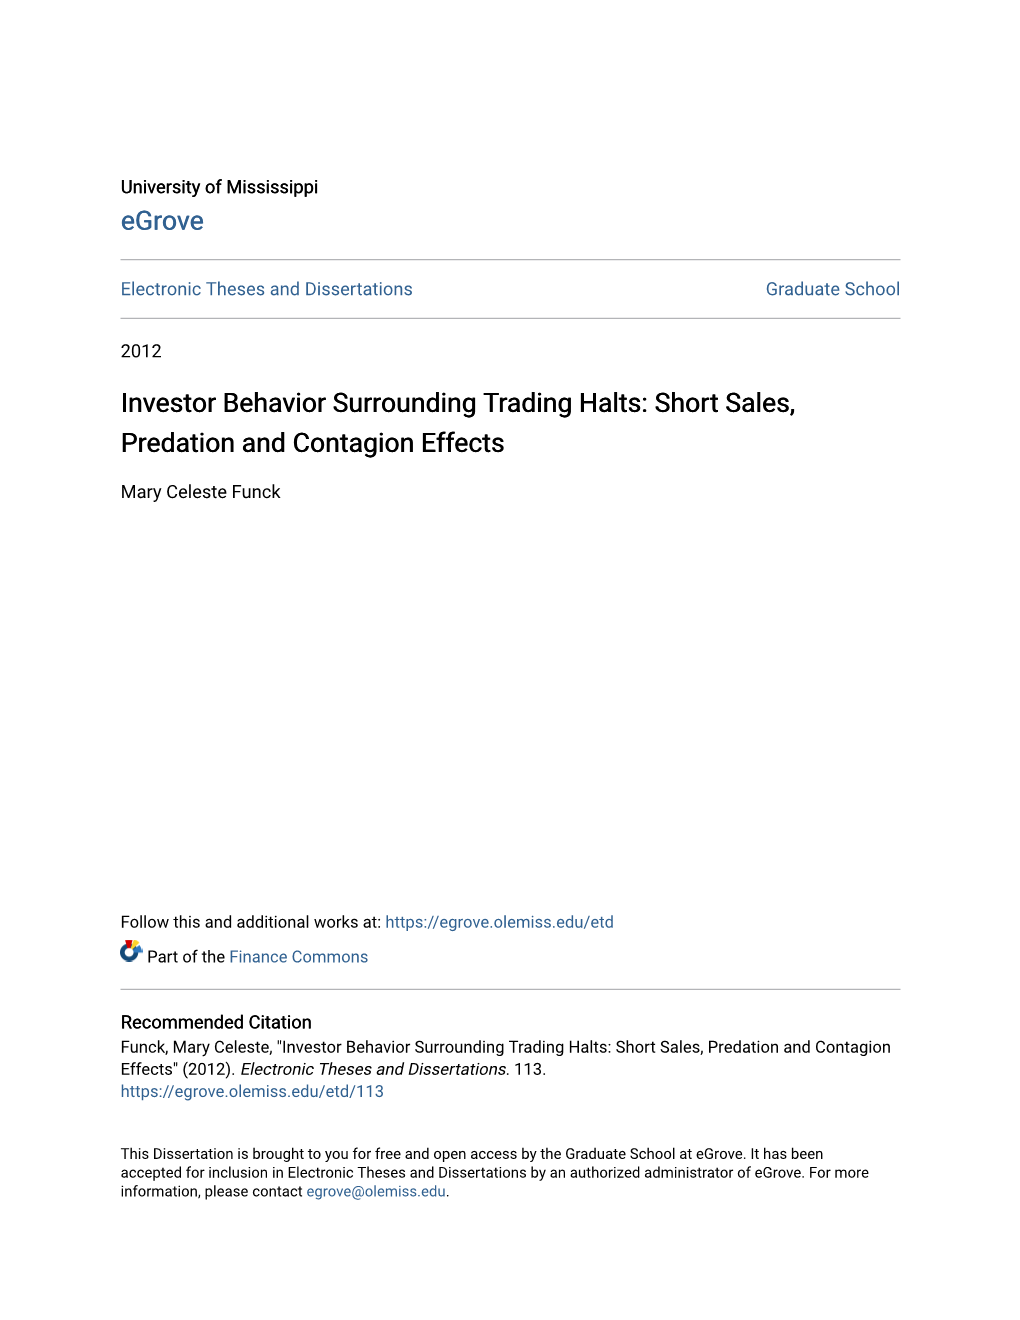 Investor Behavior Surrounding Trading Halts: Short Sales, Predation and Contagion Effects